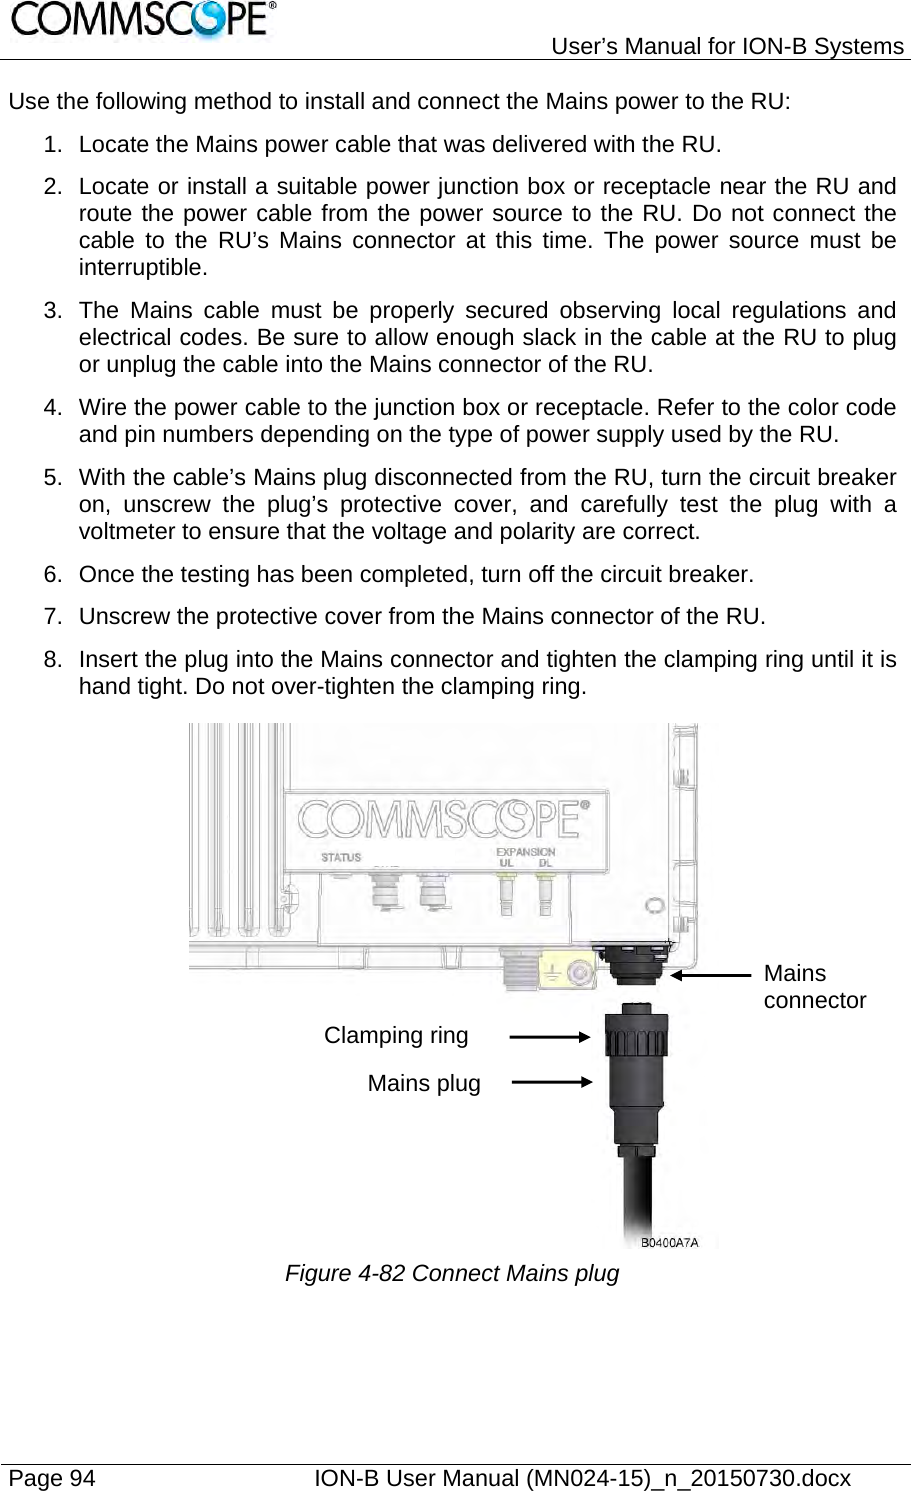   User’s Manual for ION-B Systems Page 94    ION-B User Manual (MN024-15)_n_20150730.docx  Use the following method to install and connect the Mains power to the RU: 1.  Locate the Mains power cable that was delivered with the RU. 2.  Locate or install a suitable power junction box or receptacle near the RU and route the power cable from the power source to the RU. Do not connect the cable to the RU’s Mains connector at this time. The power source must be interruptible. 3.  The Mains cable must be properly secured observing local regulations and electrical codes. Be sure to allow enough slack in the cable at the RU to plug or unplug the cable into the Mains connector of the RU. 4.  Wire the power cable to the junction box or receptacle. Refer to the color code and pin numbers depending on the type of power supply used by the RU. 5.  With the cable’s Mains plug disconnected from the RU, turn the circuit breaker on, unscrew the plug’s protective cover, and carefully test the plug with a voltmeter to ensure that the voltage and polarity are correct. 6.  Once the testing has been completed, turn off the circuit breaker. 7.  Unscrew the protective cover from the Mains connector of the RU. 8.  Insert the plug into the Mains connector and tighten the clamping ring until it is hand tight. Do not over-tighten the clamping ring.  Figure 4-82 Connect Mains plug Clamping ring Mains plug Mains connector